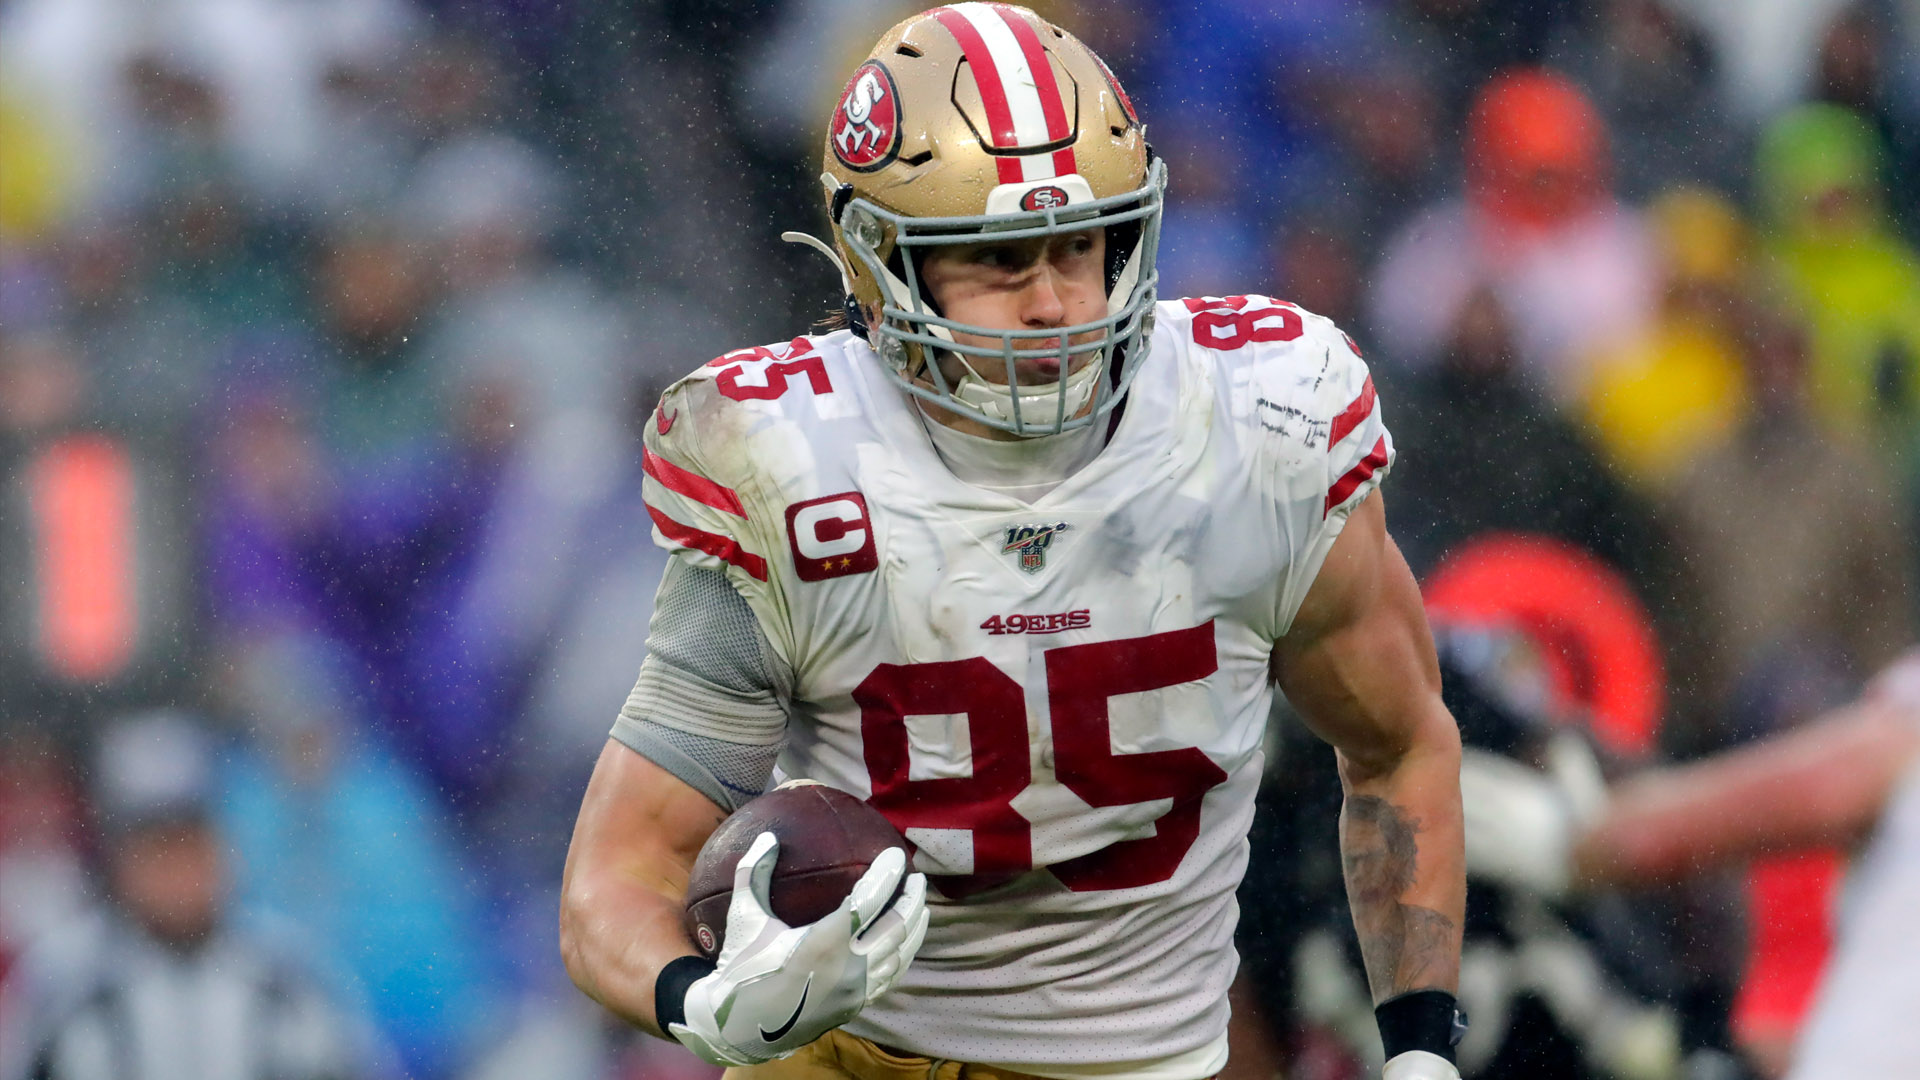 49ers star tight end George Kittle credits father for his toughness